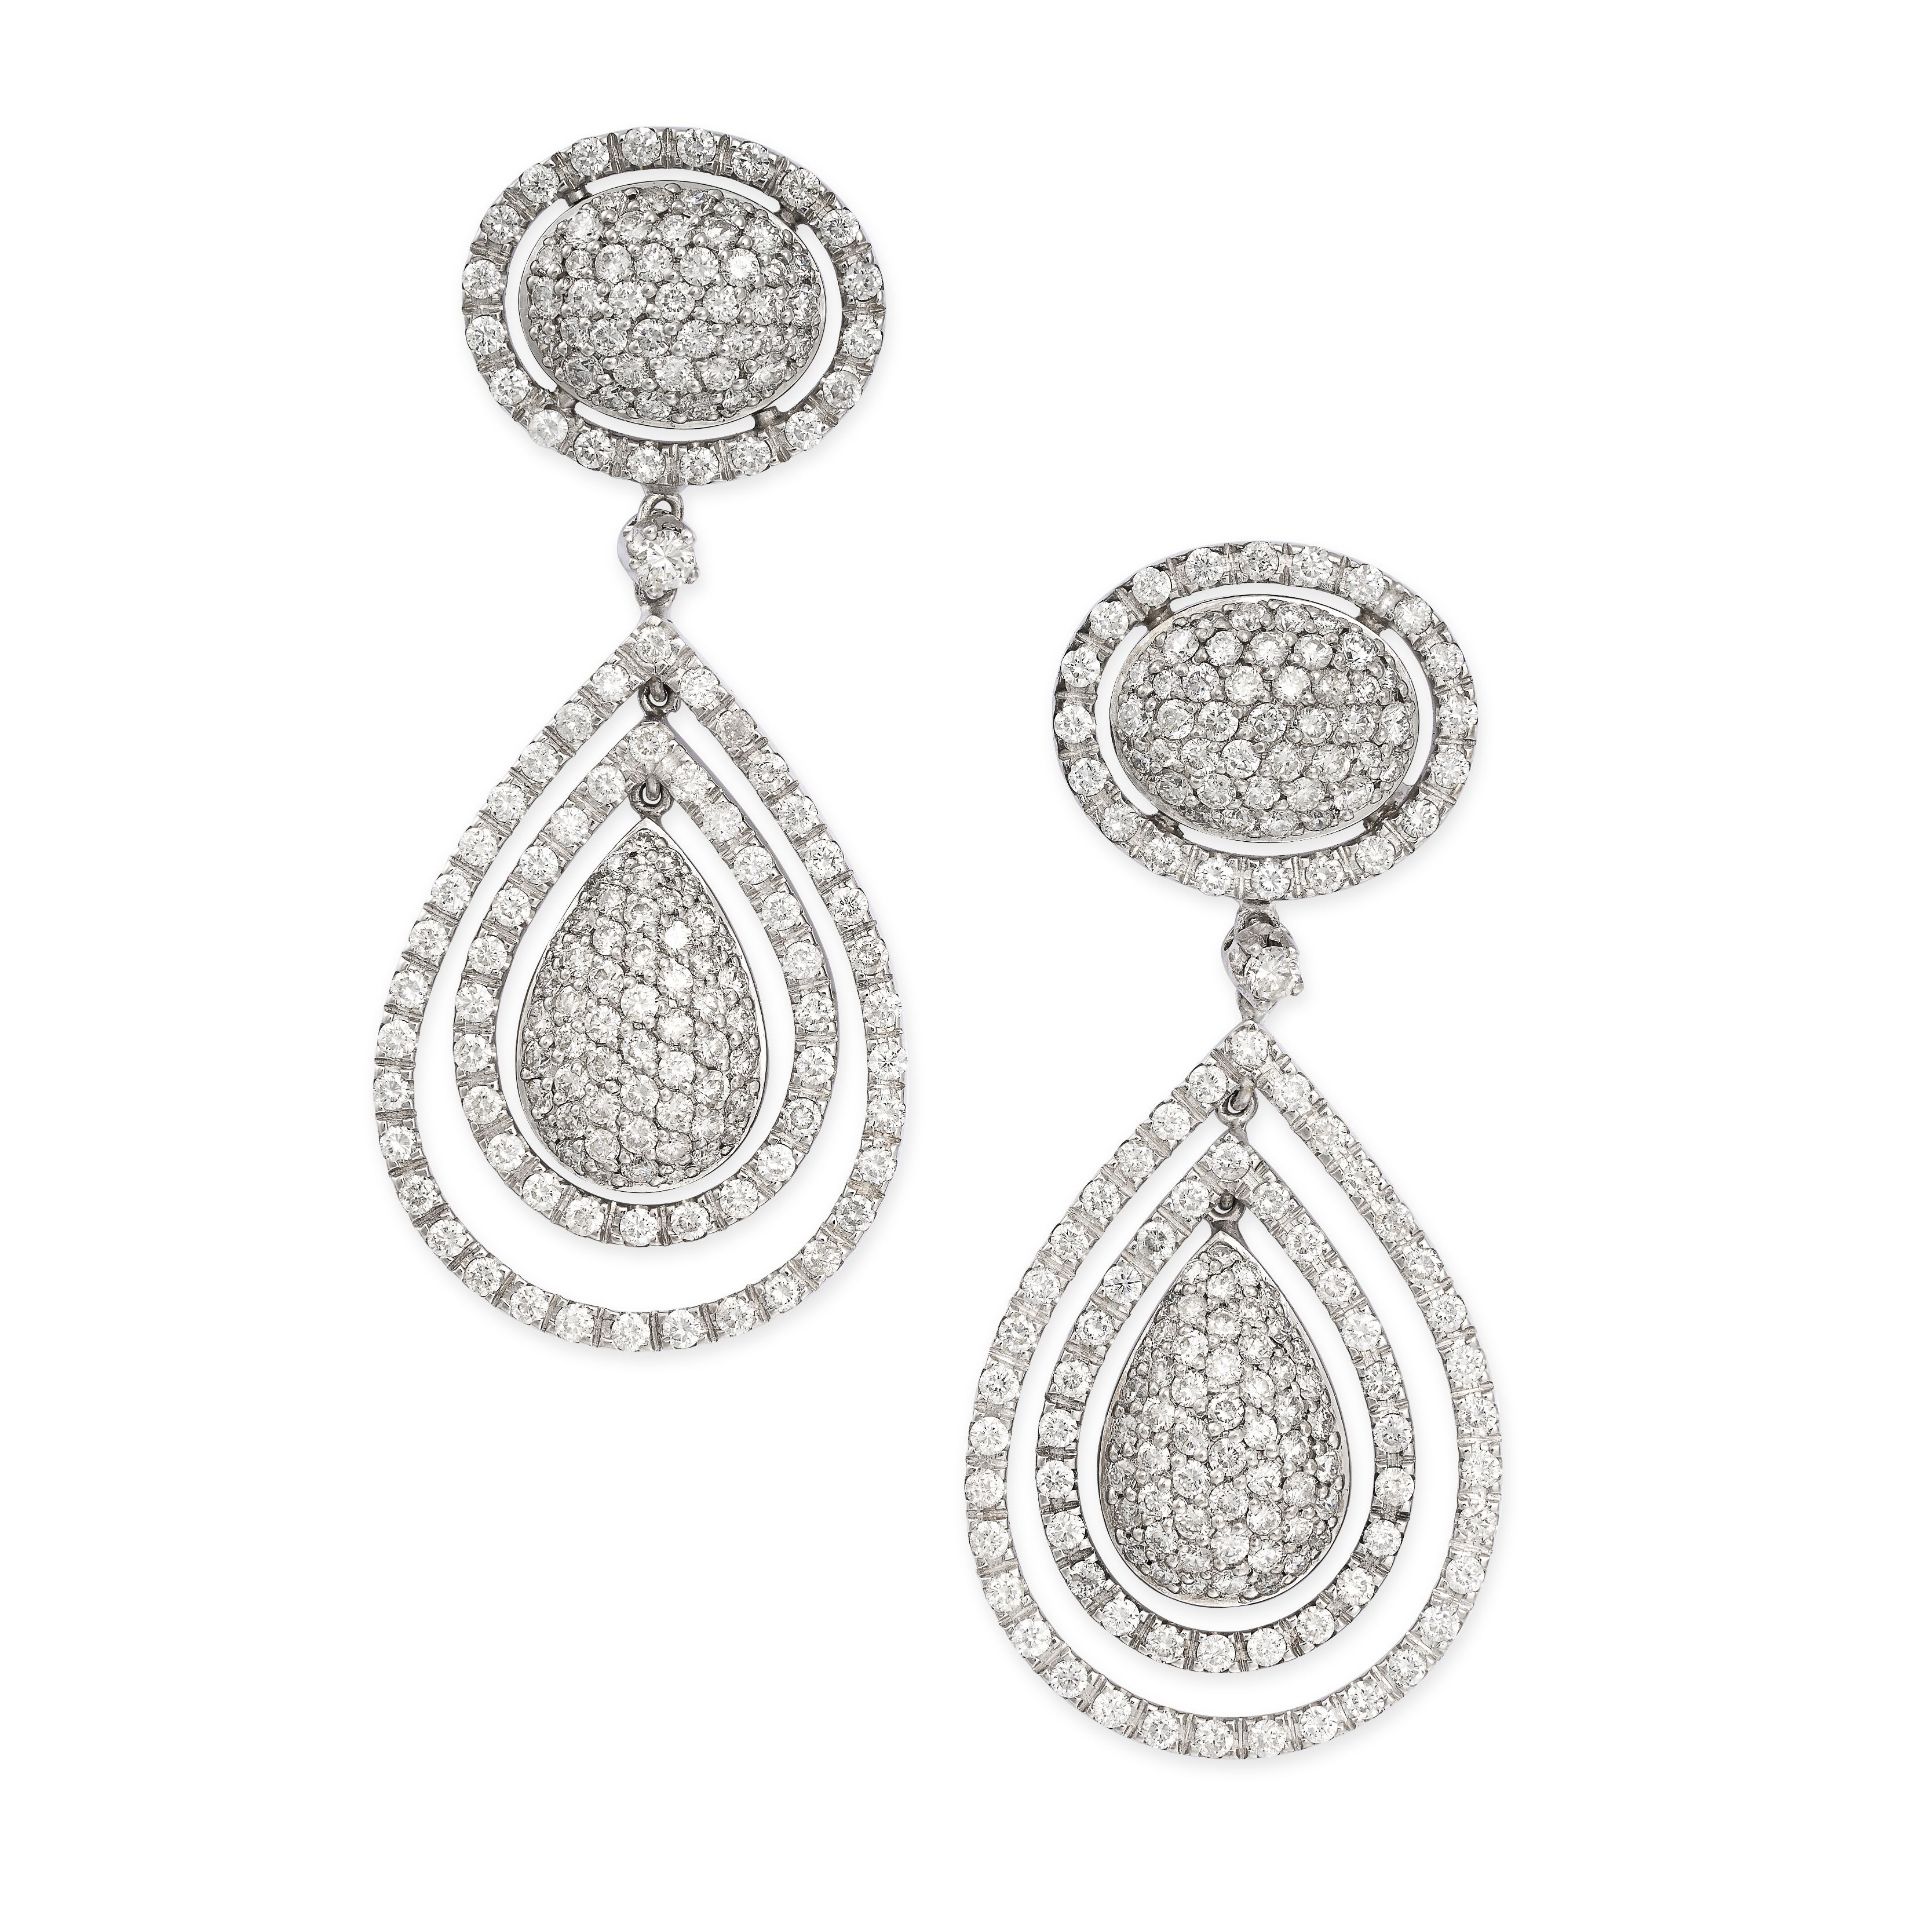 A PAIR OF DIAMOND DROP EARRINGS with central pave set diamond pear shaped domes surrounded by two